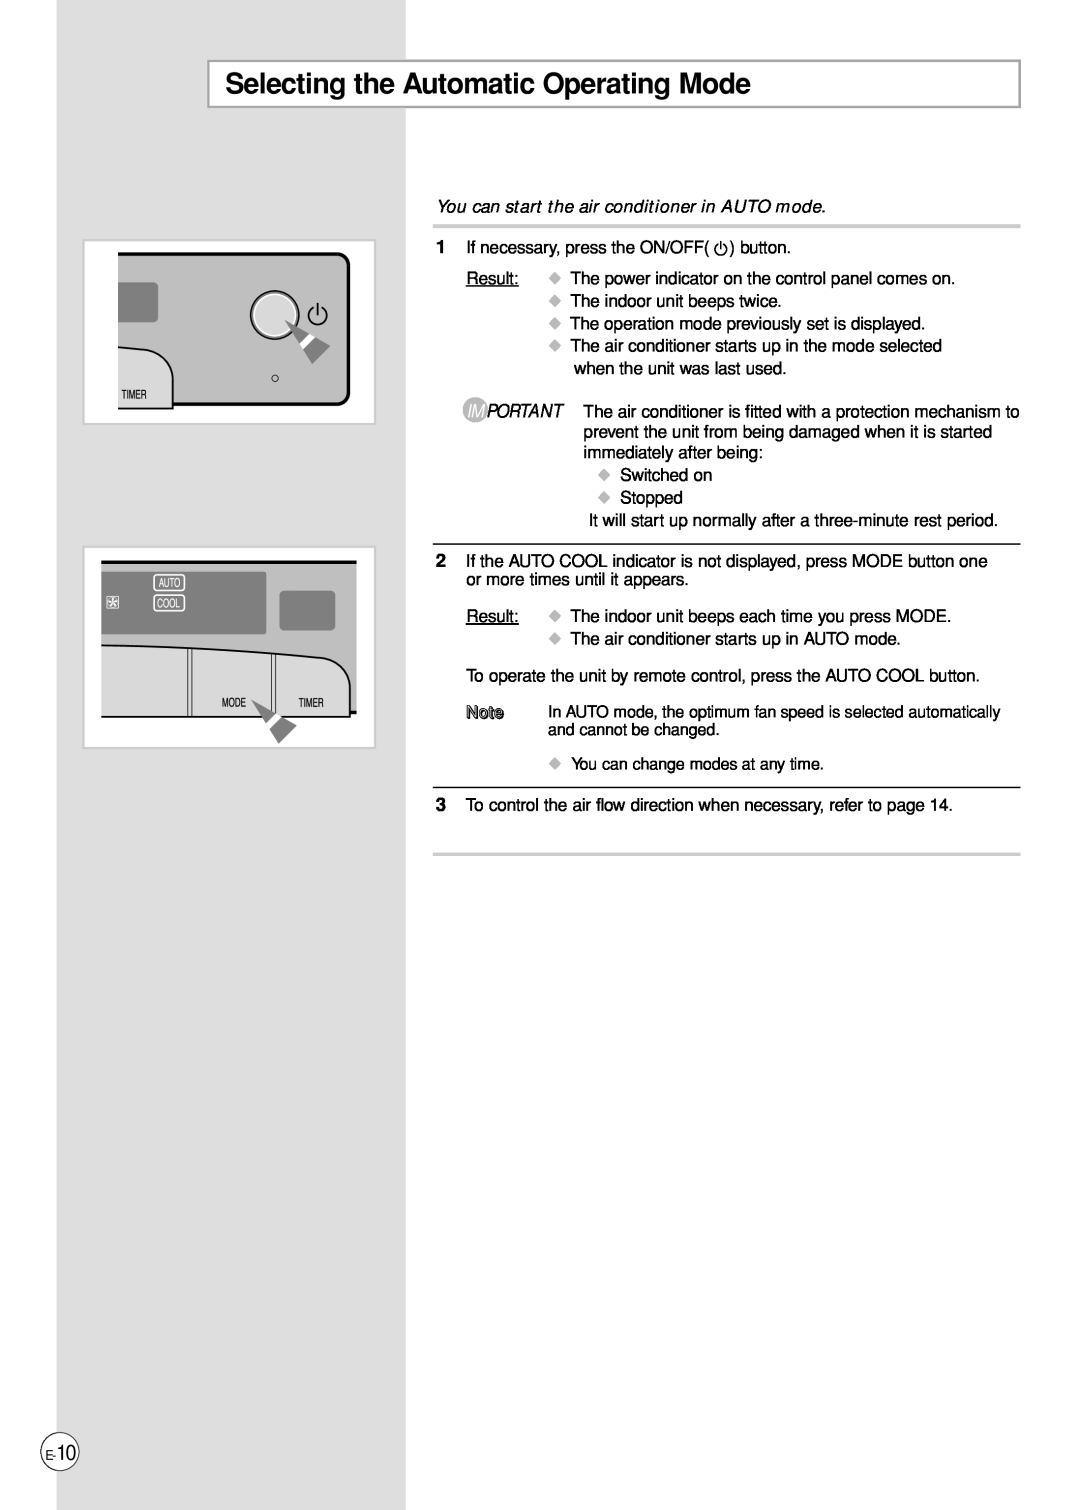 Samsung AP500PF installation manual Selecting the Automatic Operating Mode, You can start the air conditioner in AUTO mode 